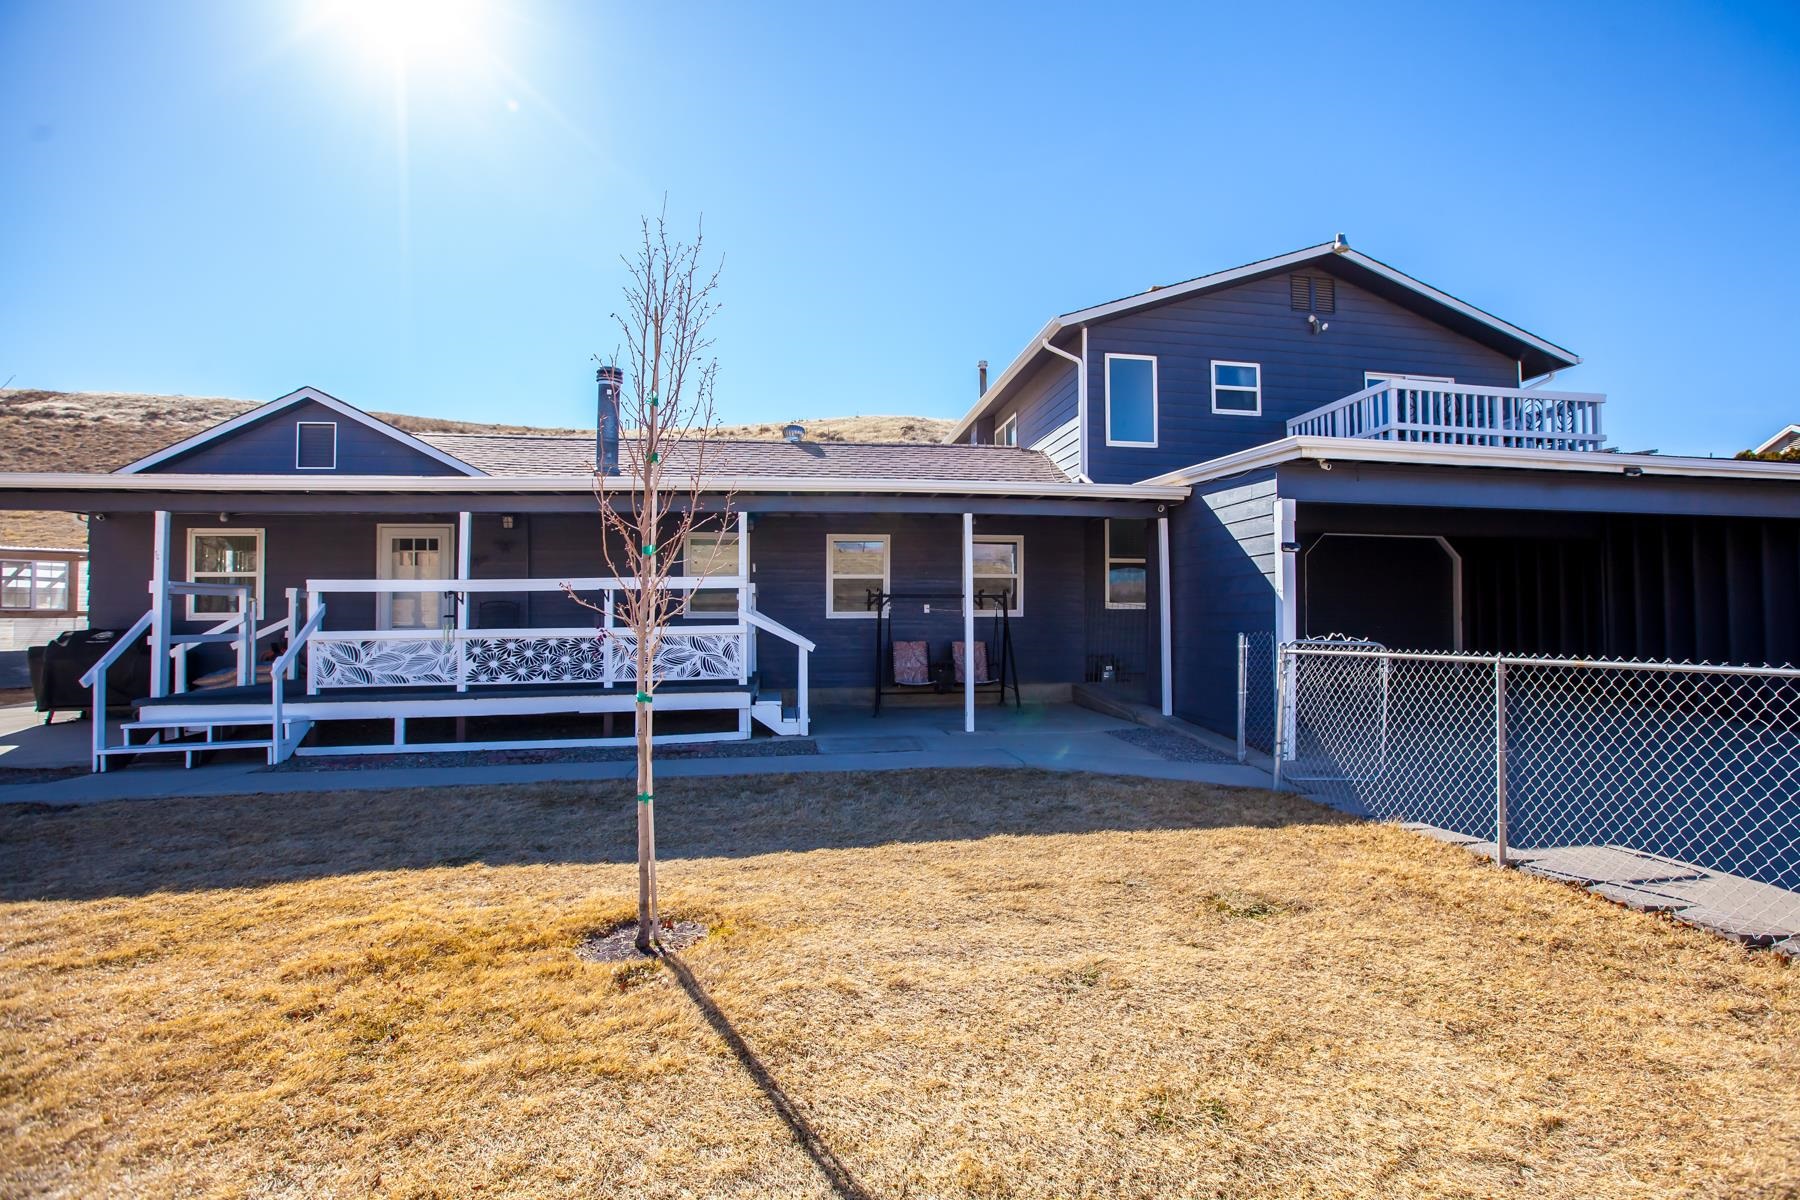 101 29 3/4 Road, Grand Junction, CO 81503